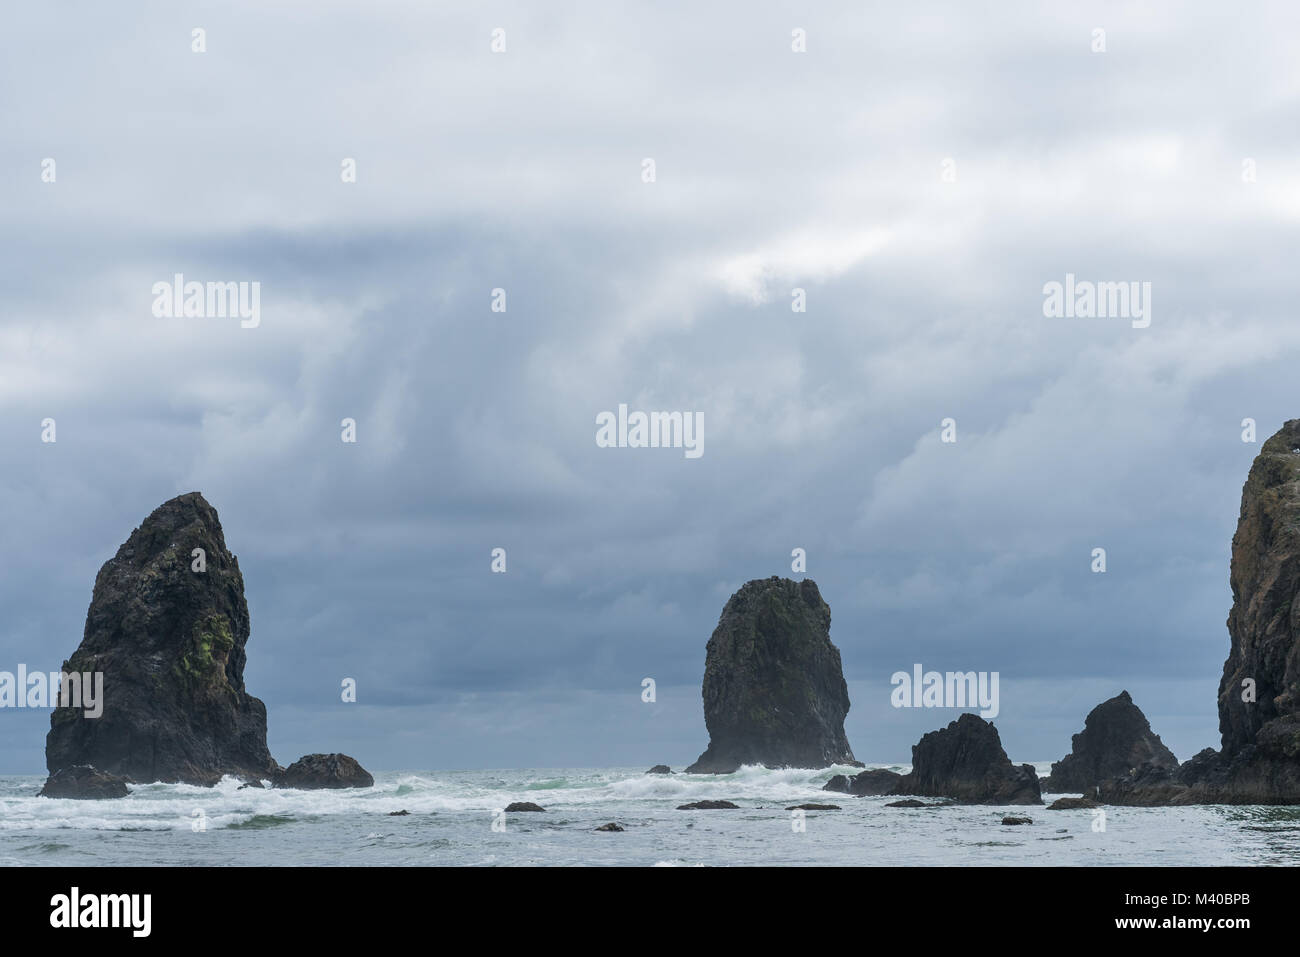 The Rocky Outcroppings of Cannon Beach, Oregon on the pacific northwest coast. Featured in a scene of the popular movie 'The Goonies' Stock Photo